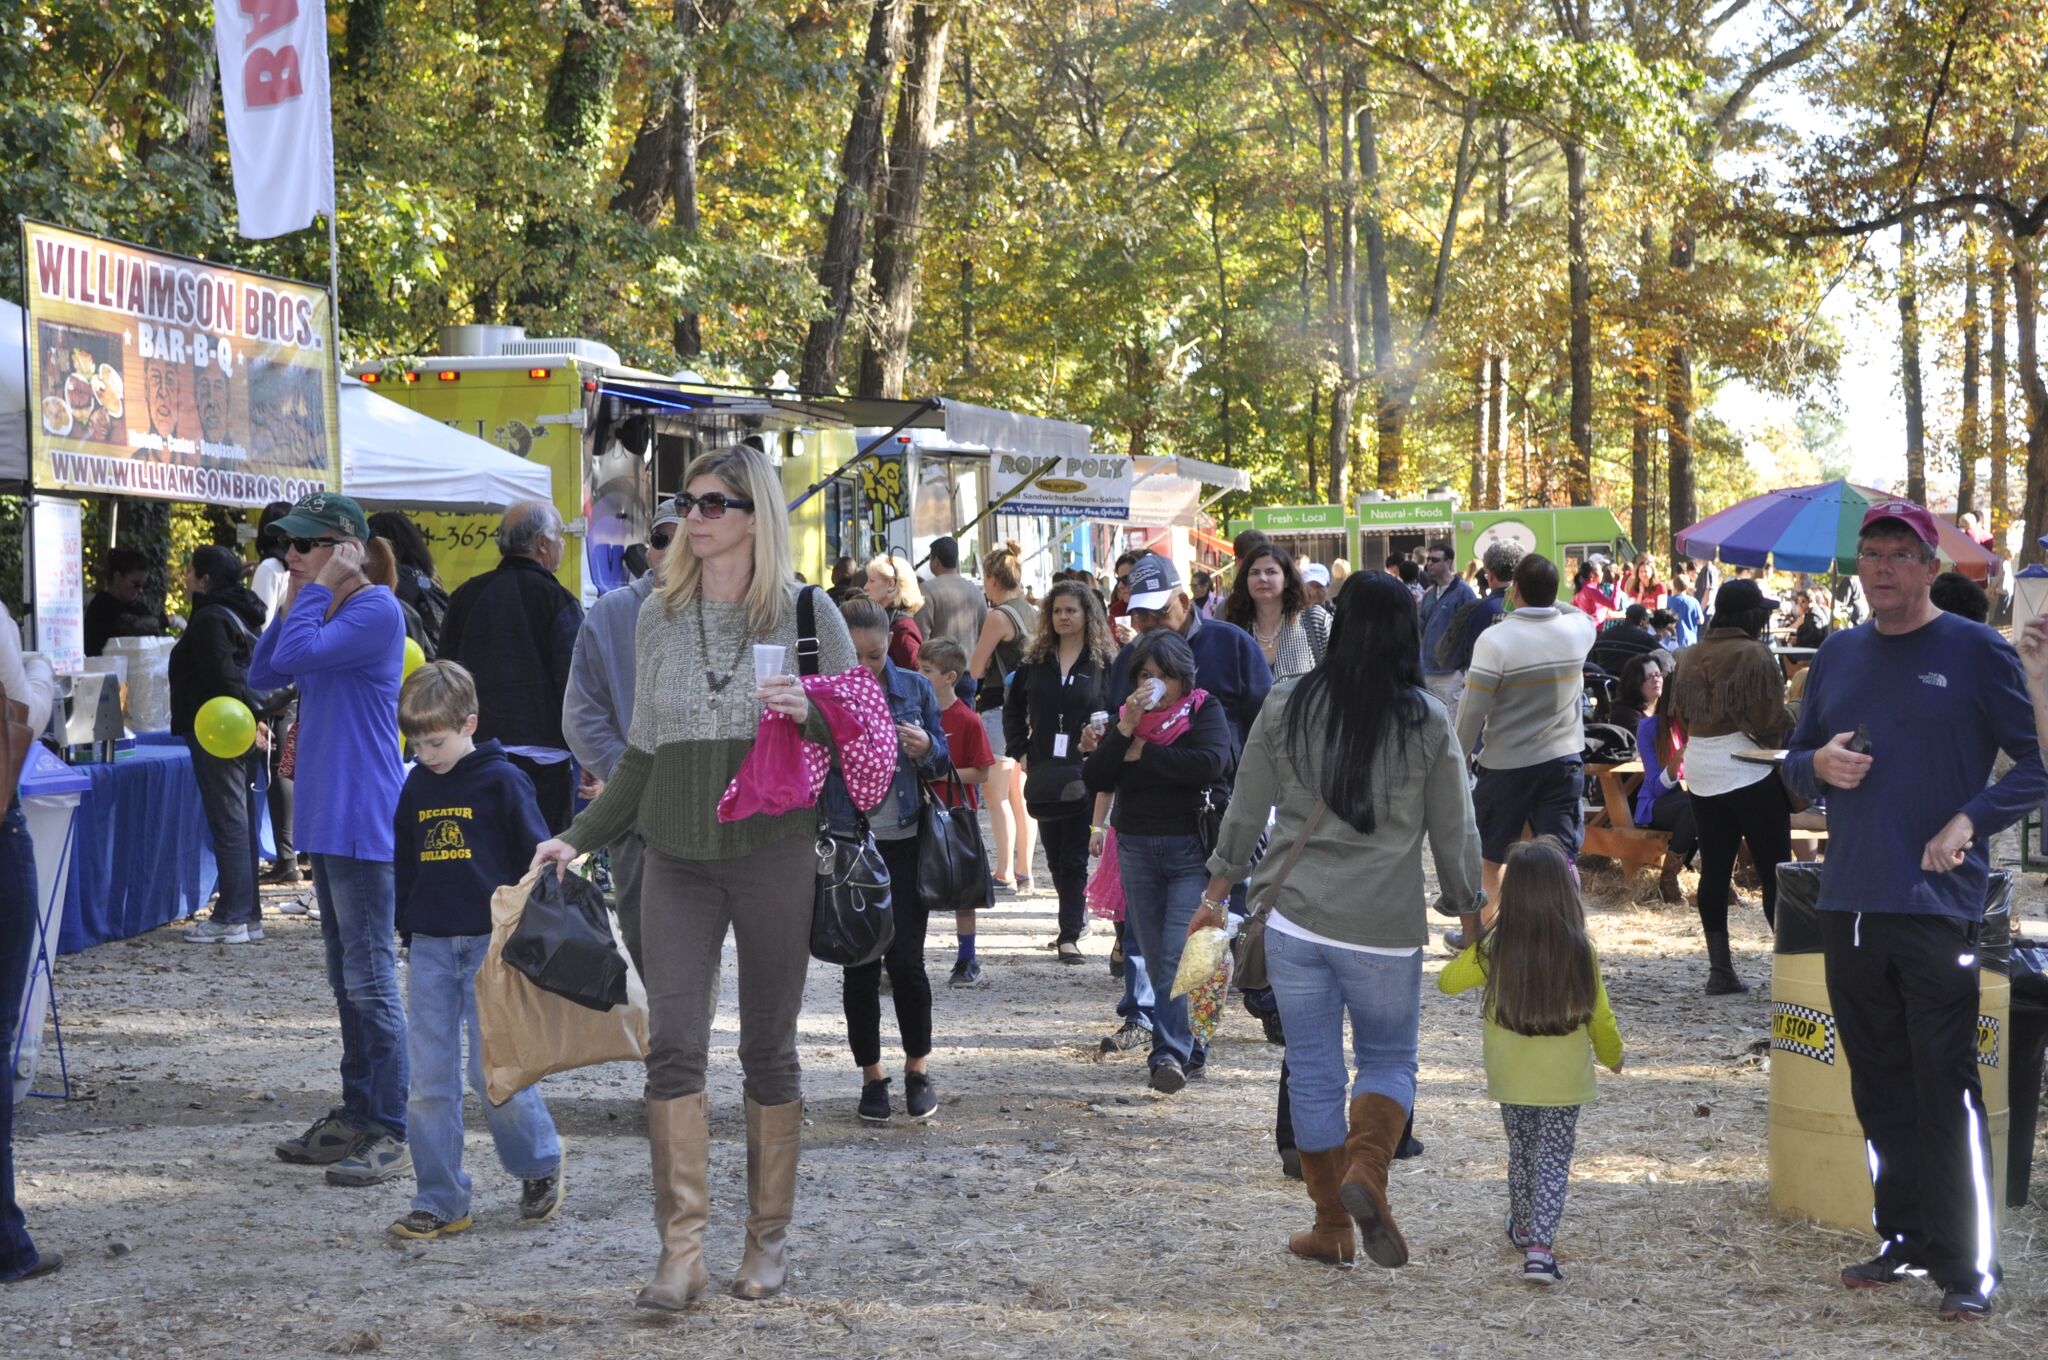 Enjoy A Little Festival Fun at the Chastain Park Fall Arts & Crafts Festival